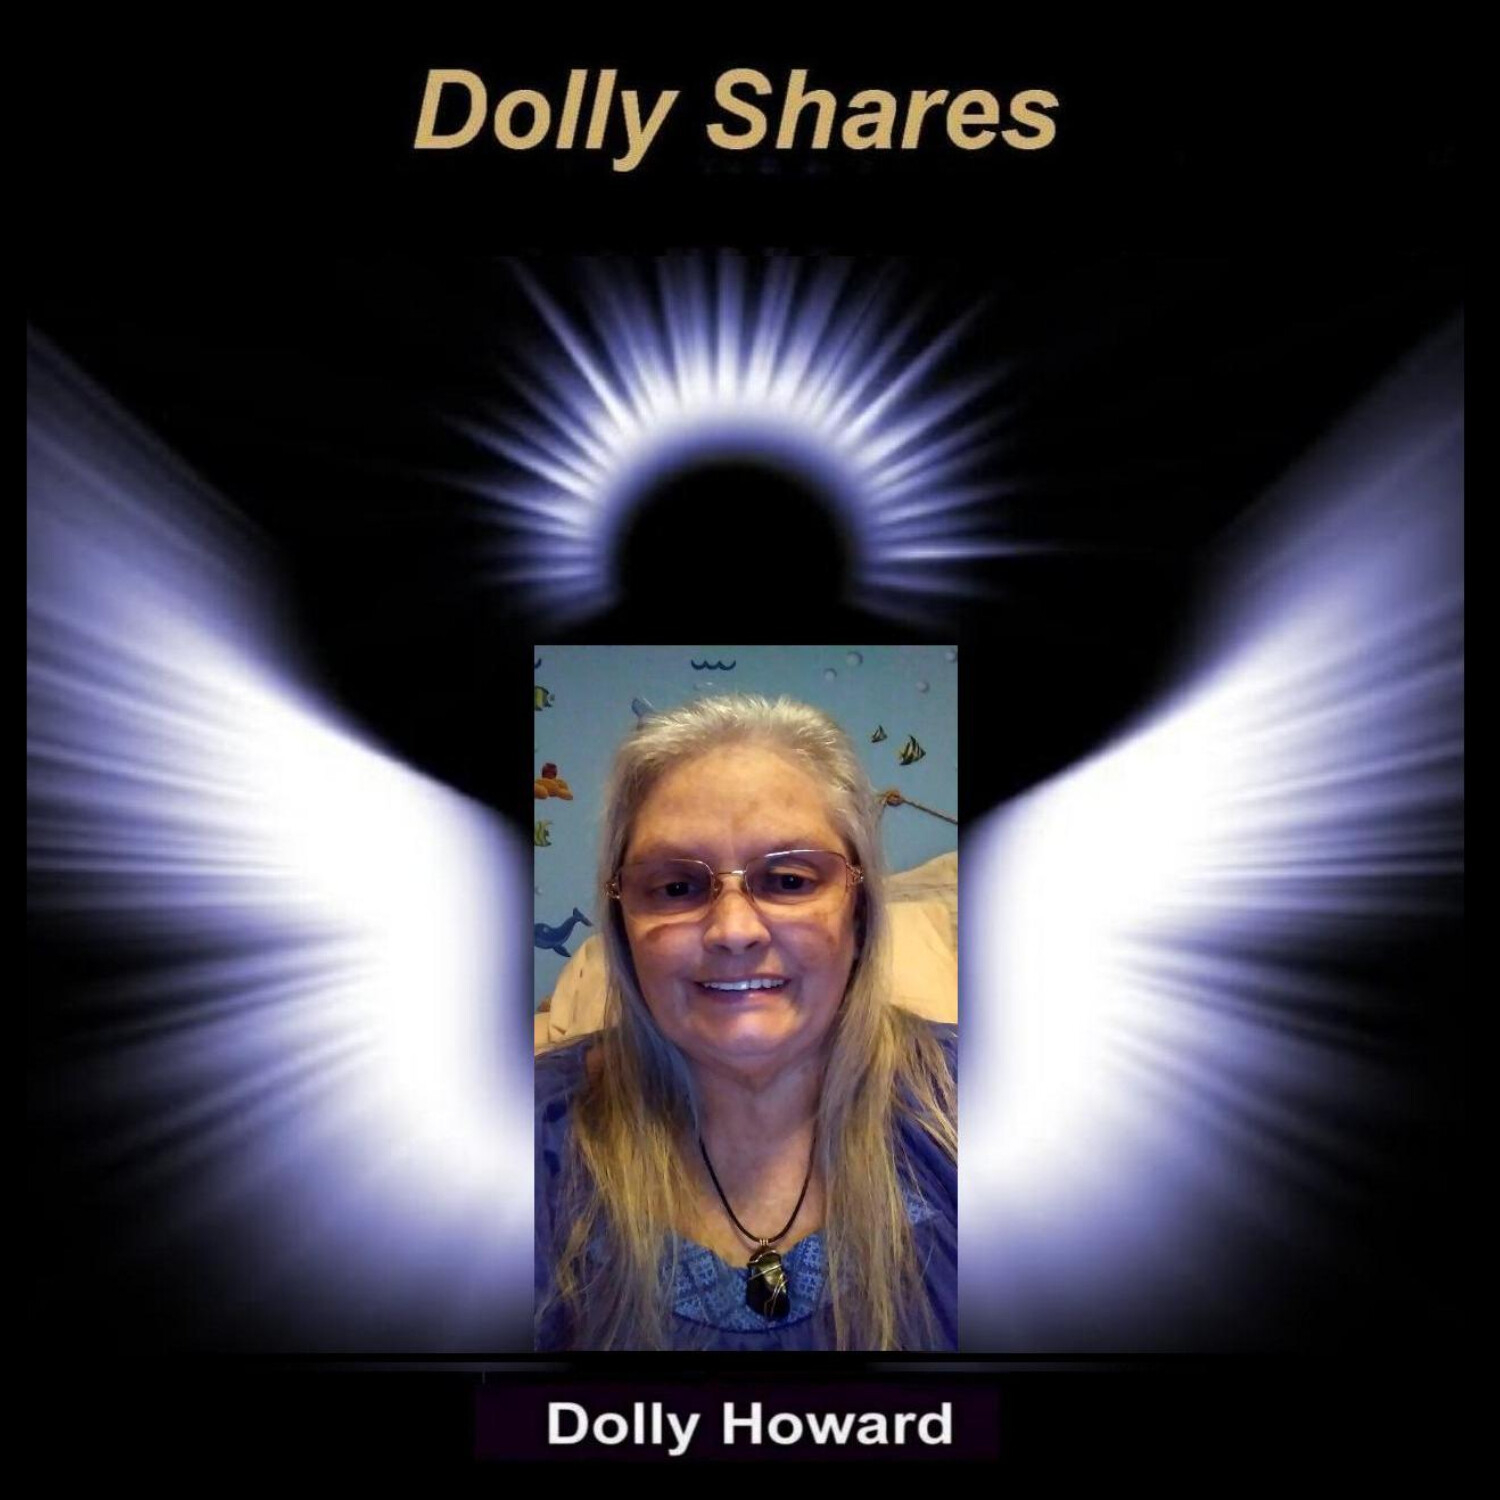 Dolly Shares 11/20/19 - Taking Care of Self